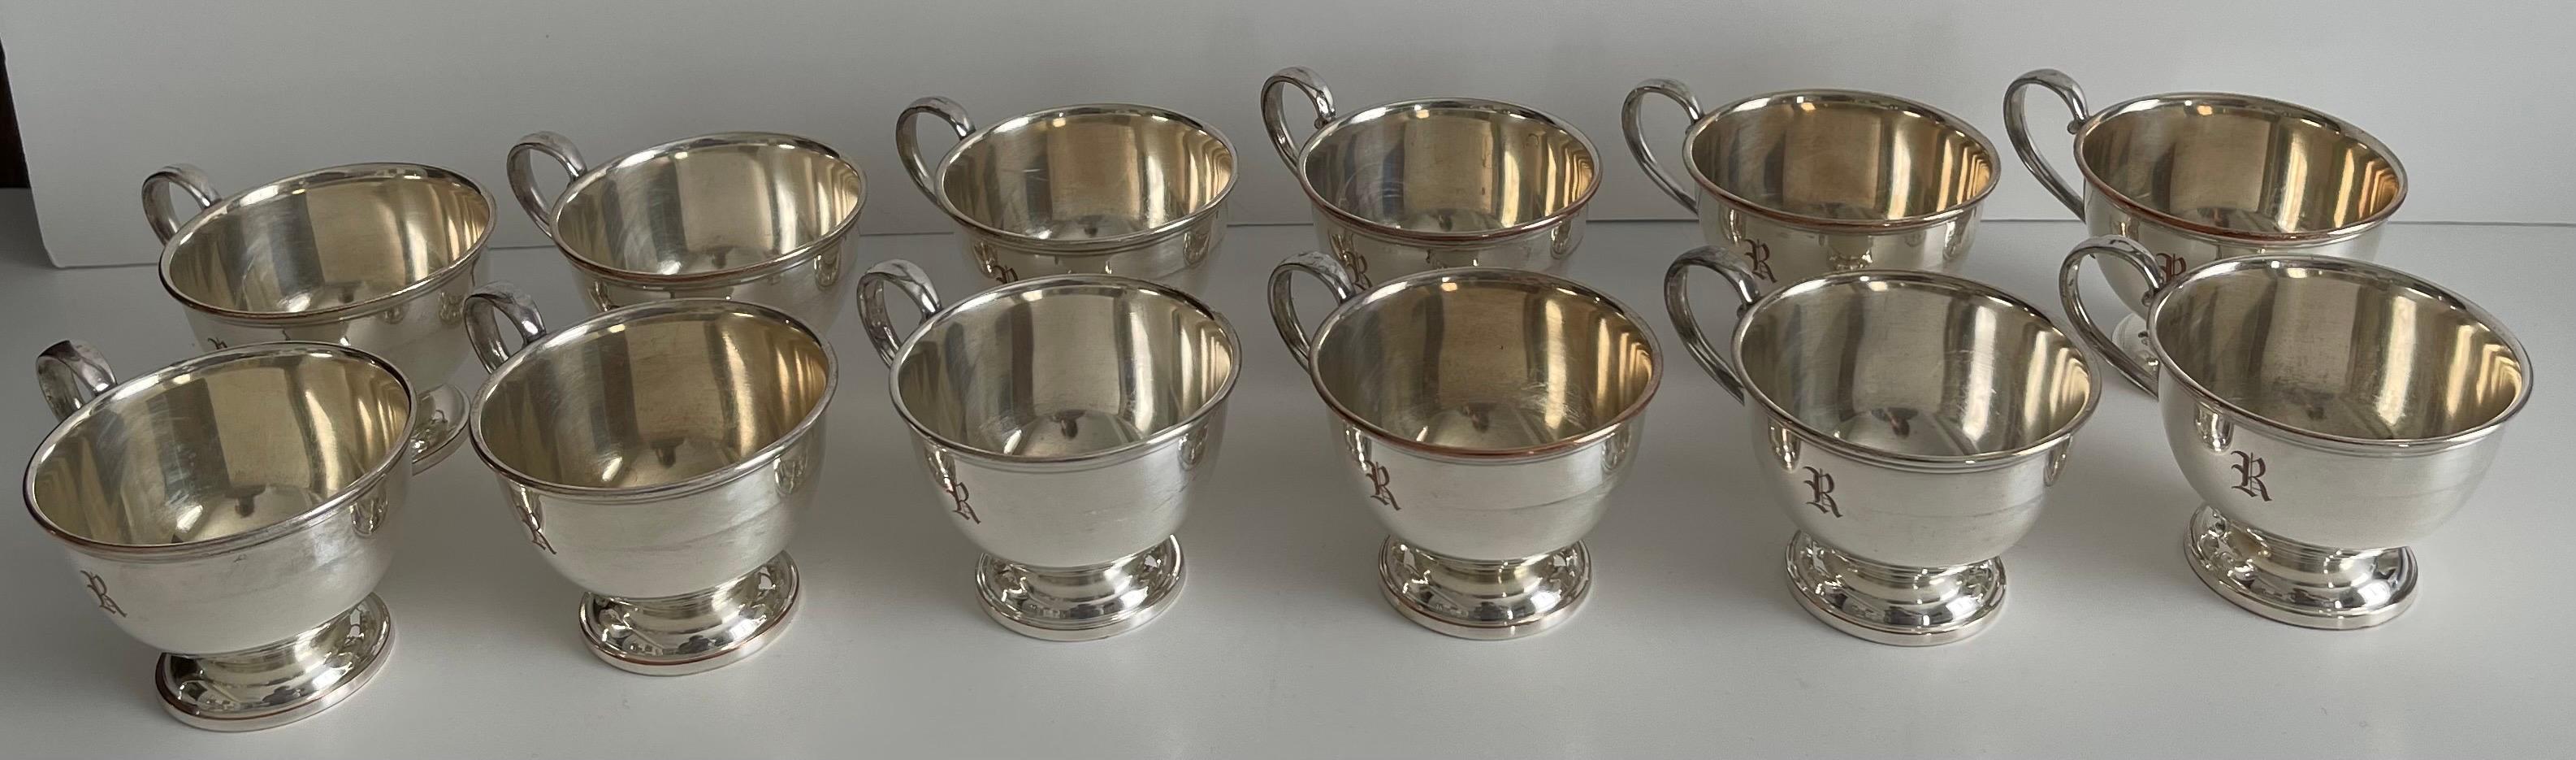 Set of 12 1950s silver plated punch cups. 
Single R monogram on each cup,
Stamped EPC (electroplated copper) on the underside. 

Cups have been newly professionally polished to a high shine but have overall areas of silver loss.